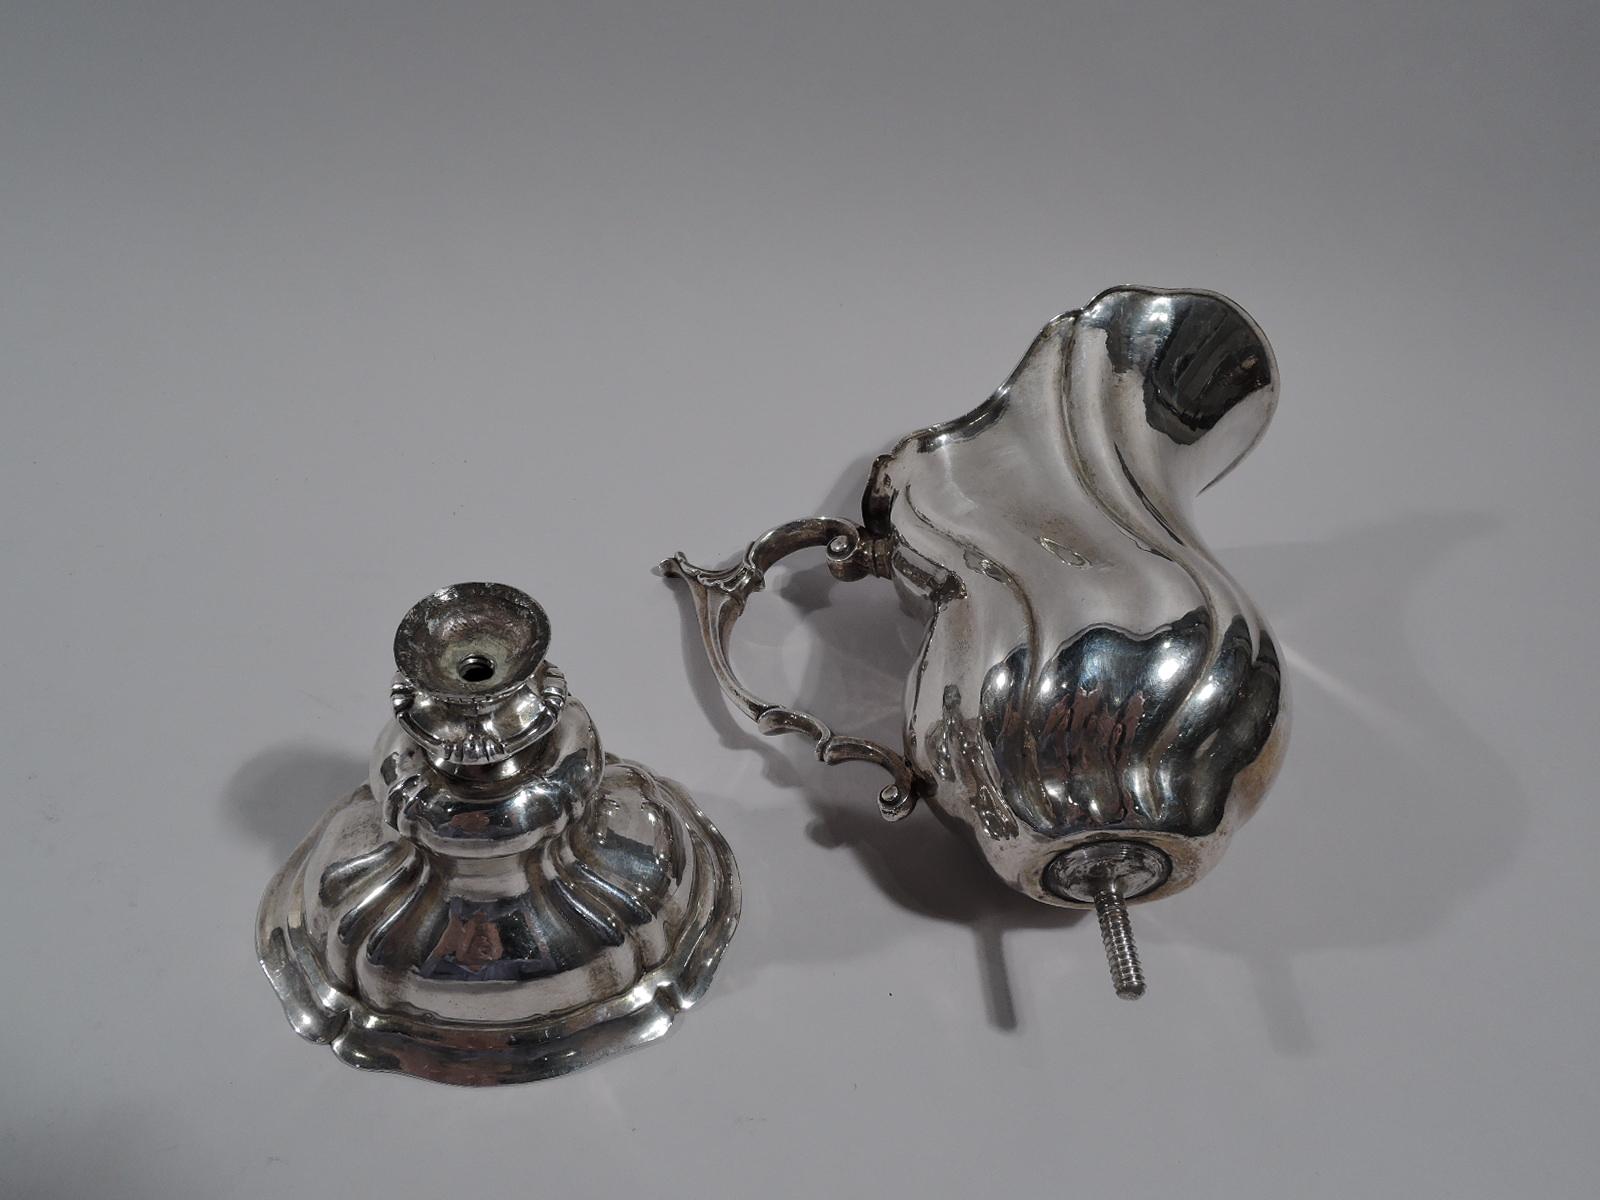 Baroque German Classical Silver Ewer with Augsburg Mark